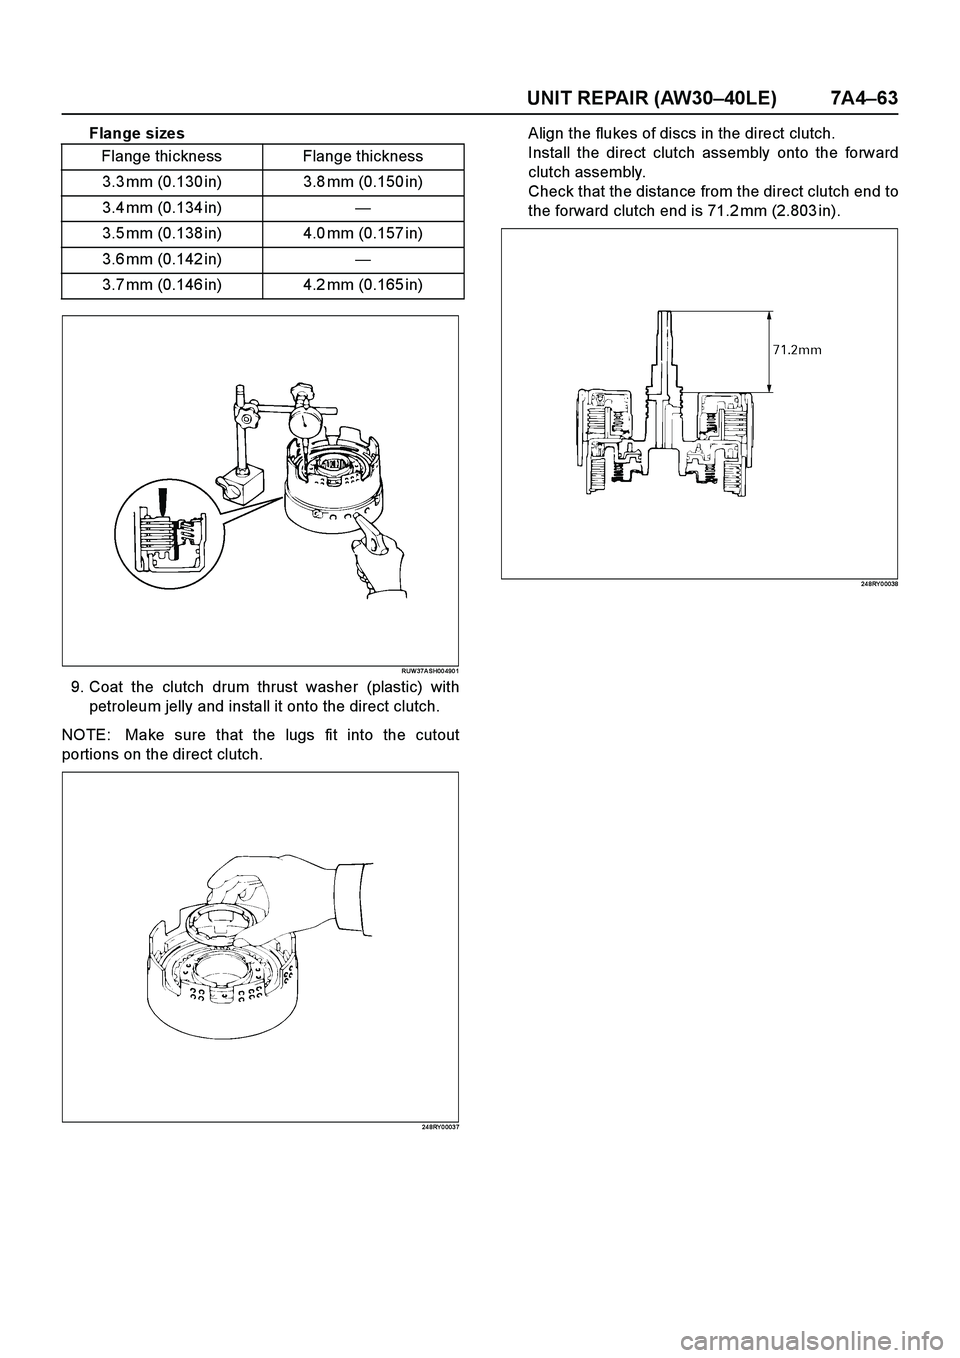 ISUZU TF SERIES 2004  Workshop Manual UNIT REPAIR (AW30–40LE) 7A4–63
Flange sizes
RUW 37A SH00 490 1
9. Coat the clutch drum thrust washer (plastic) with
petroleum jelly and install it onto the direct clutch.
NOTE:  Make sure that the